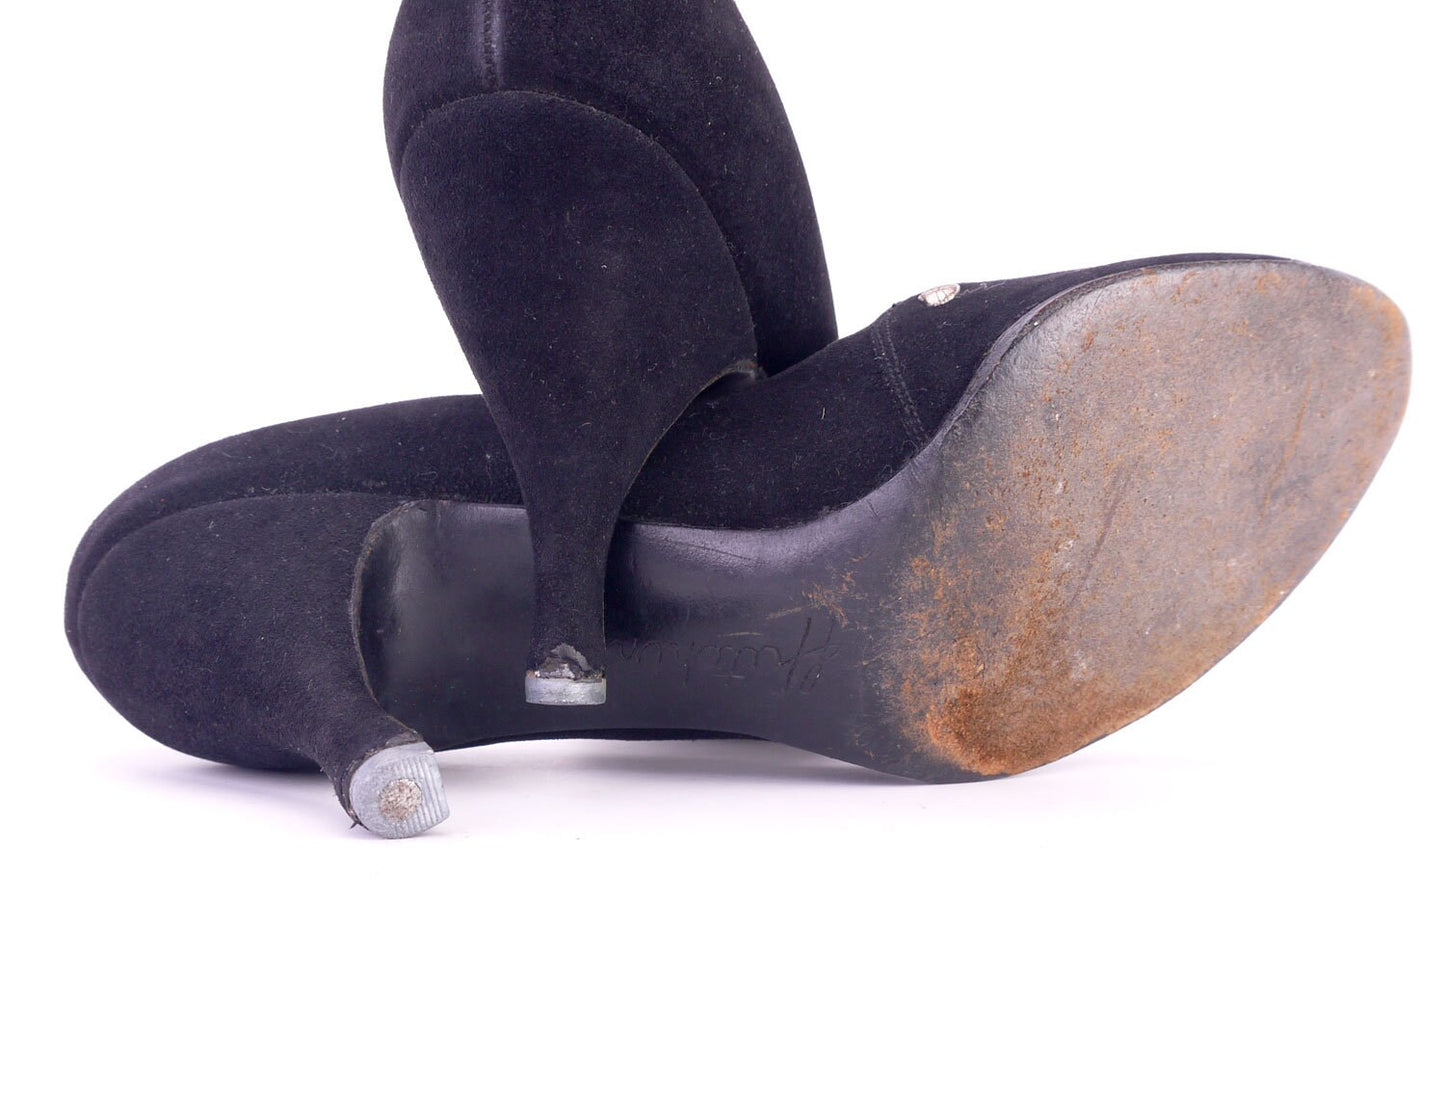 1950s Black Suede Cocktail Heels Shoes by Hutchings UK 3.5 - 4